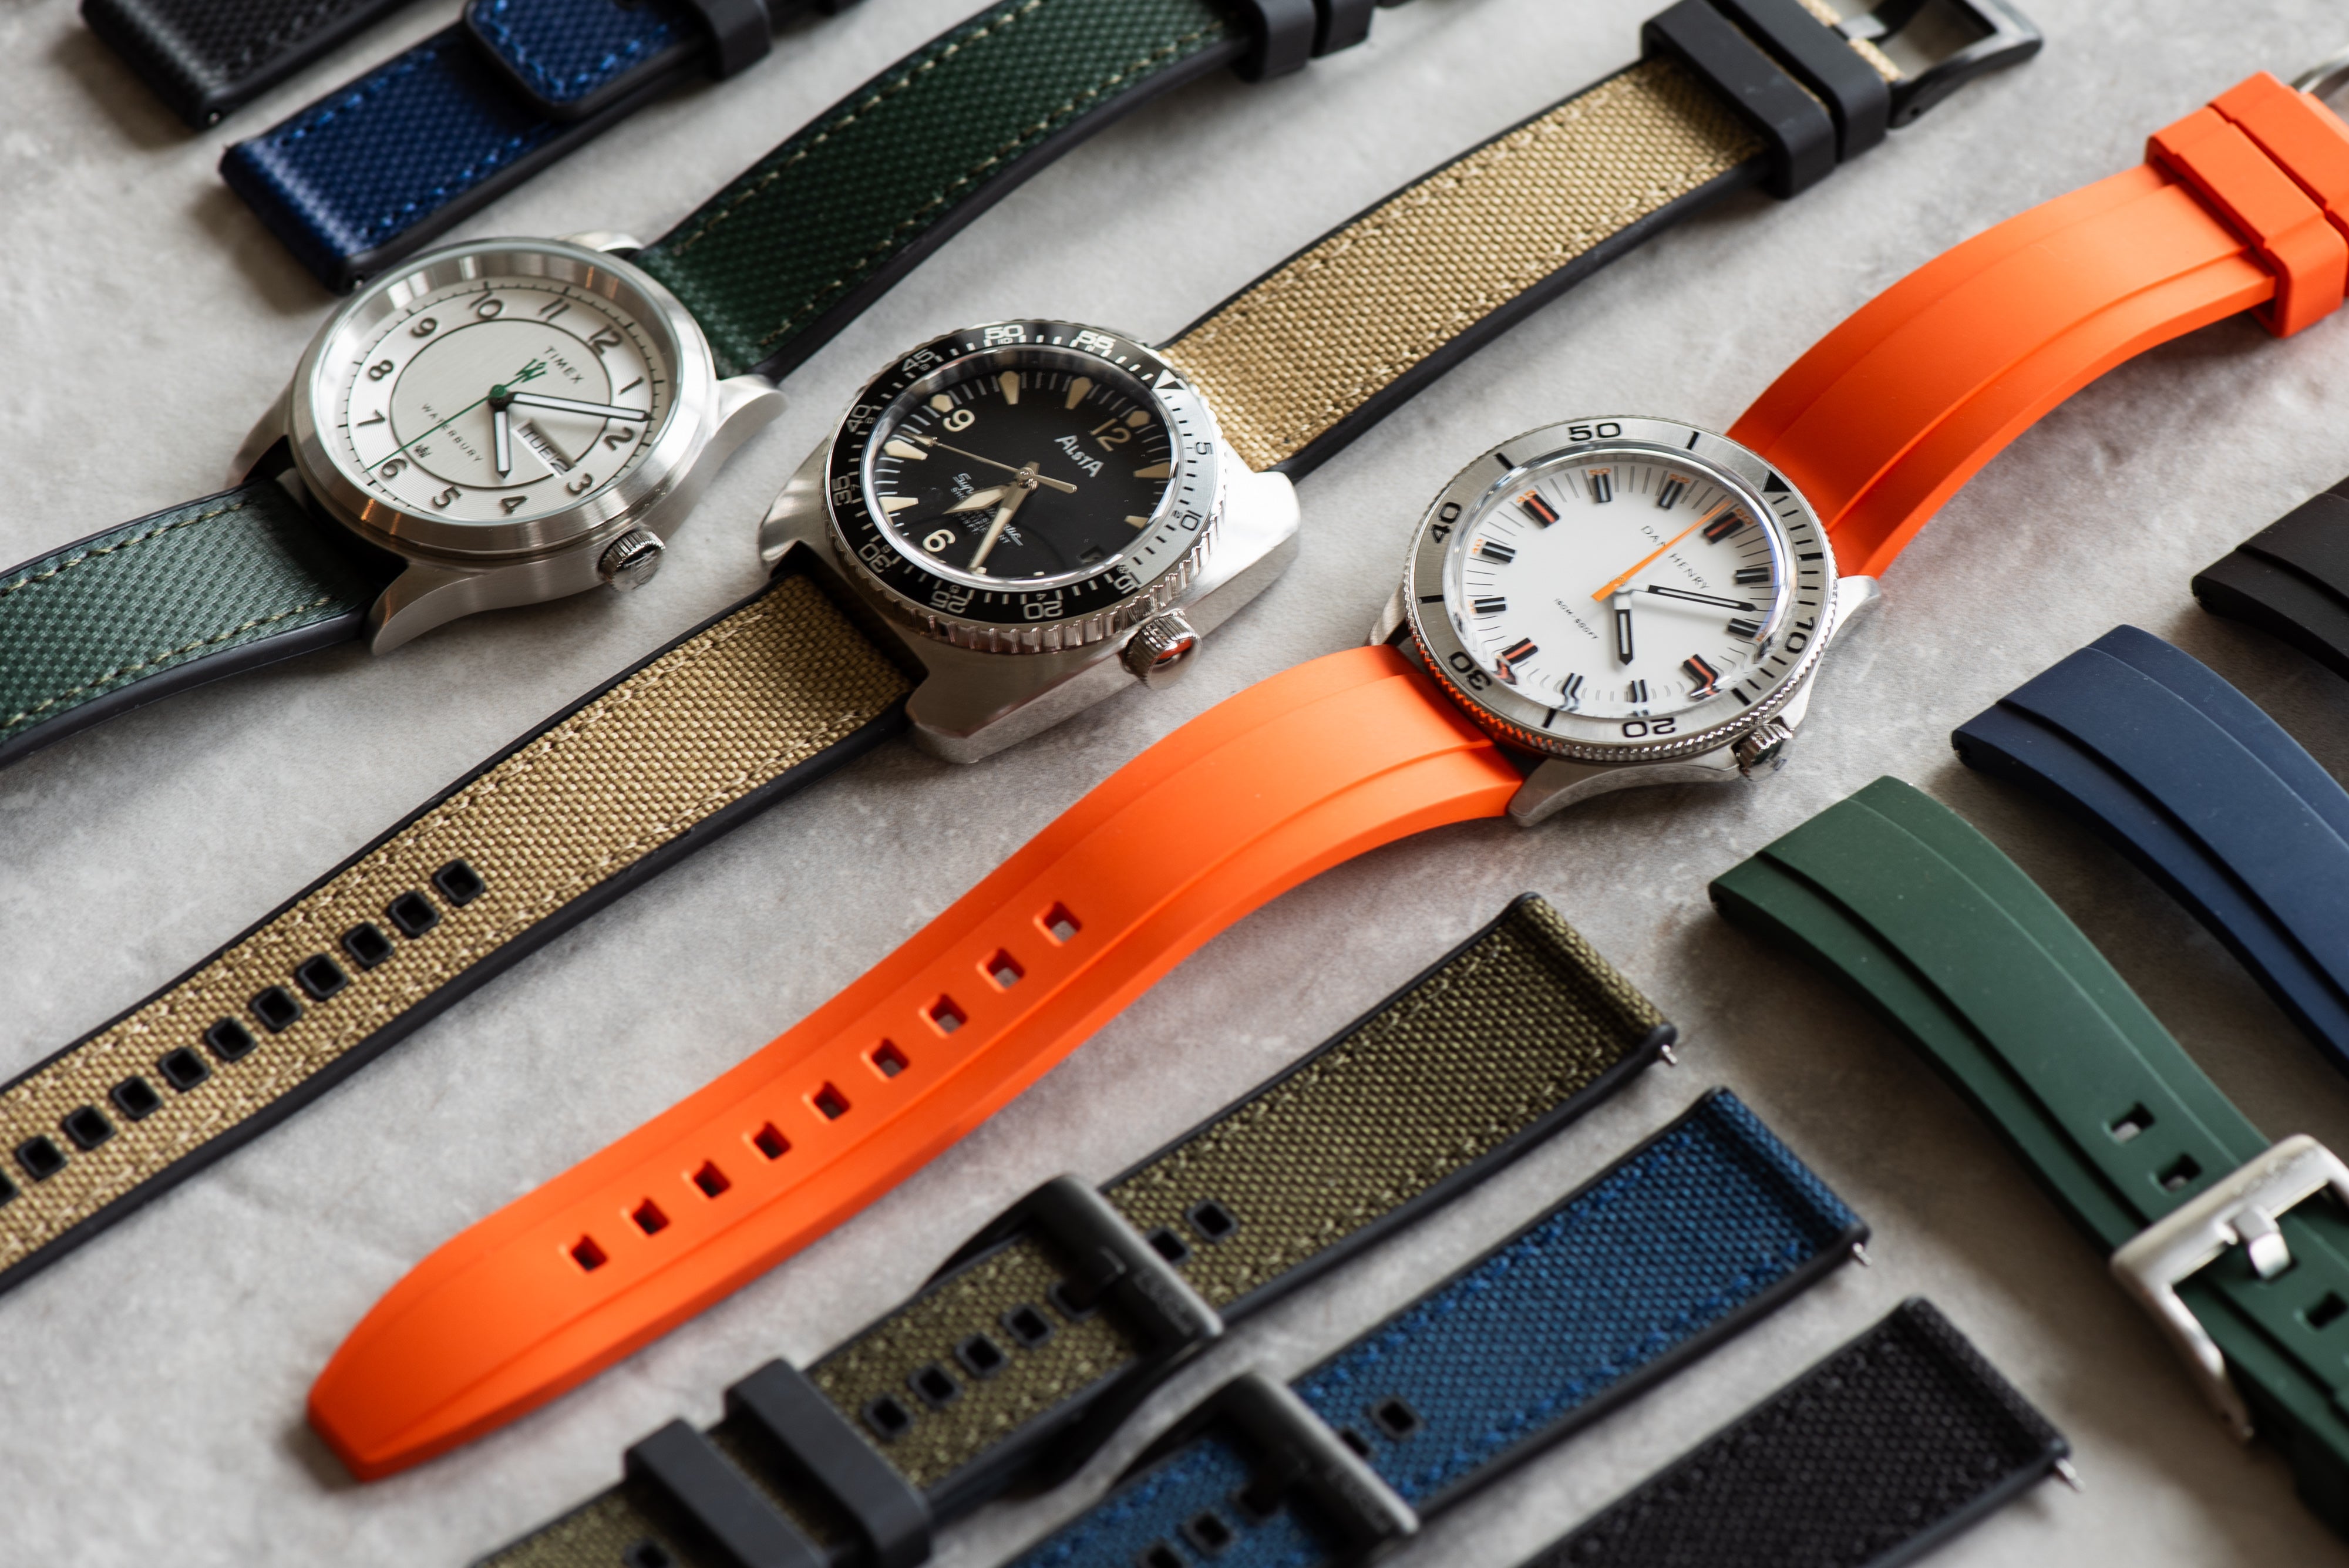 Shop leather, silicone straps, and metal bands for your watch | Watch-straps .eu